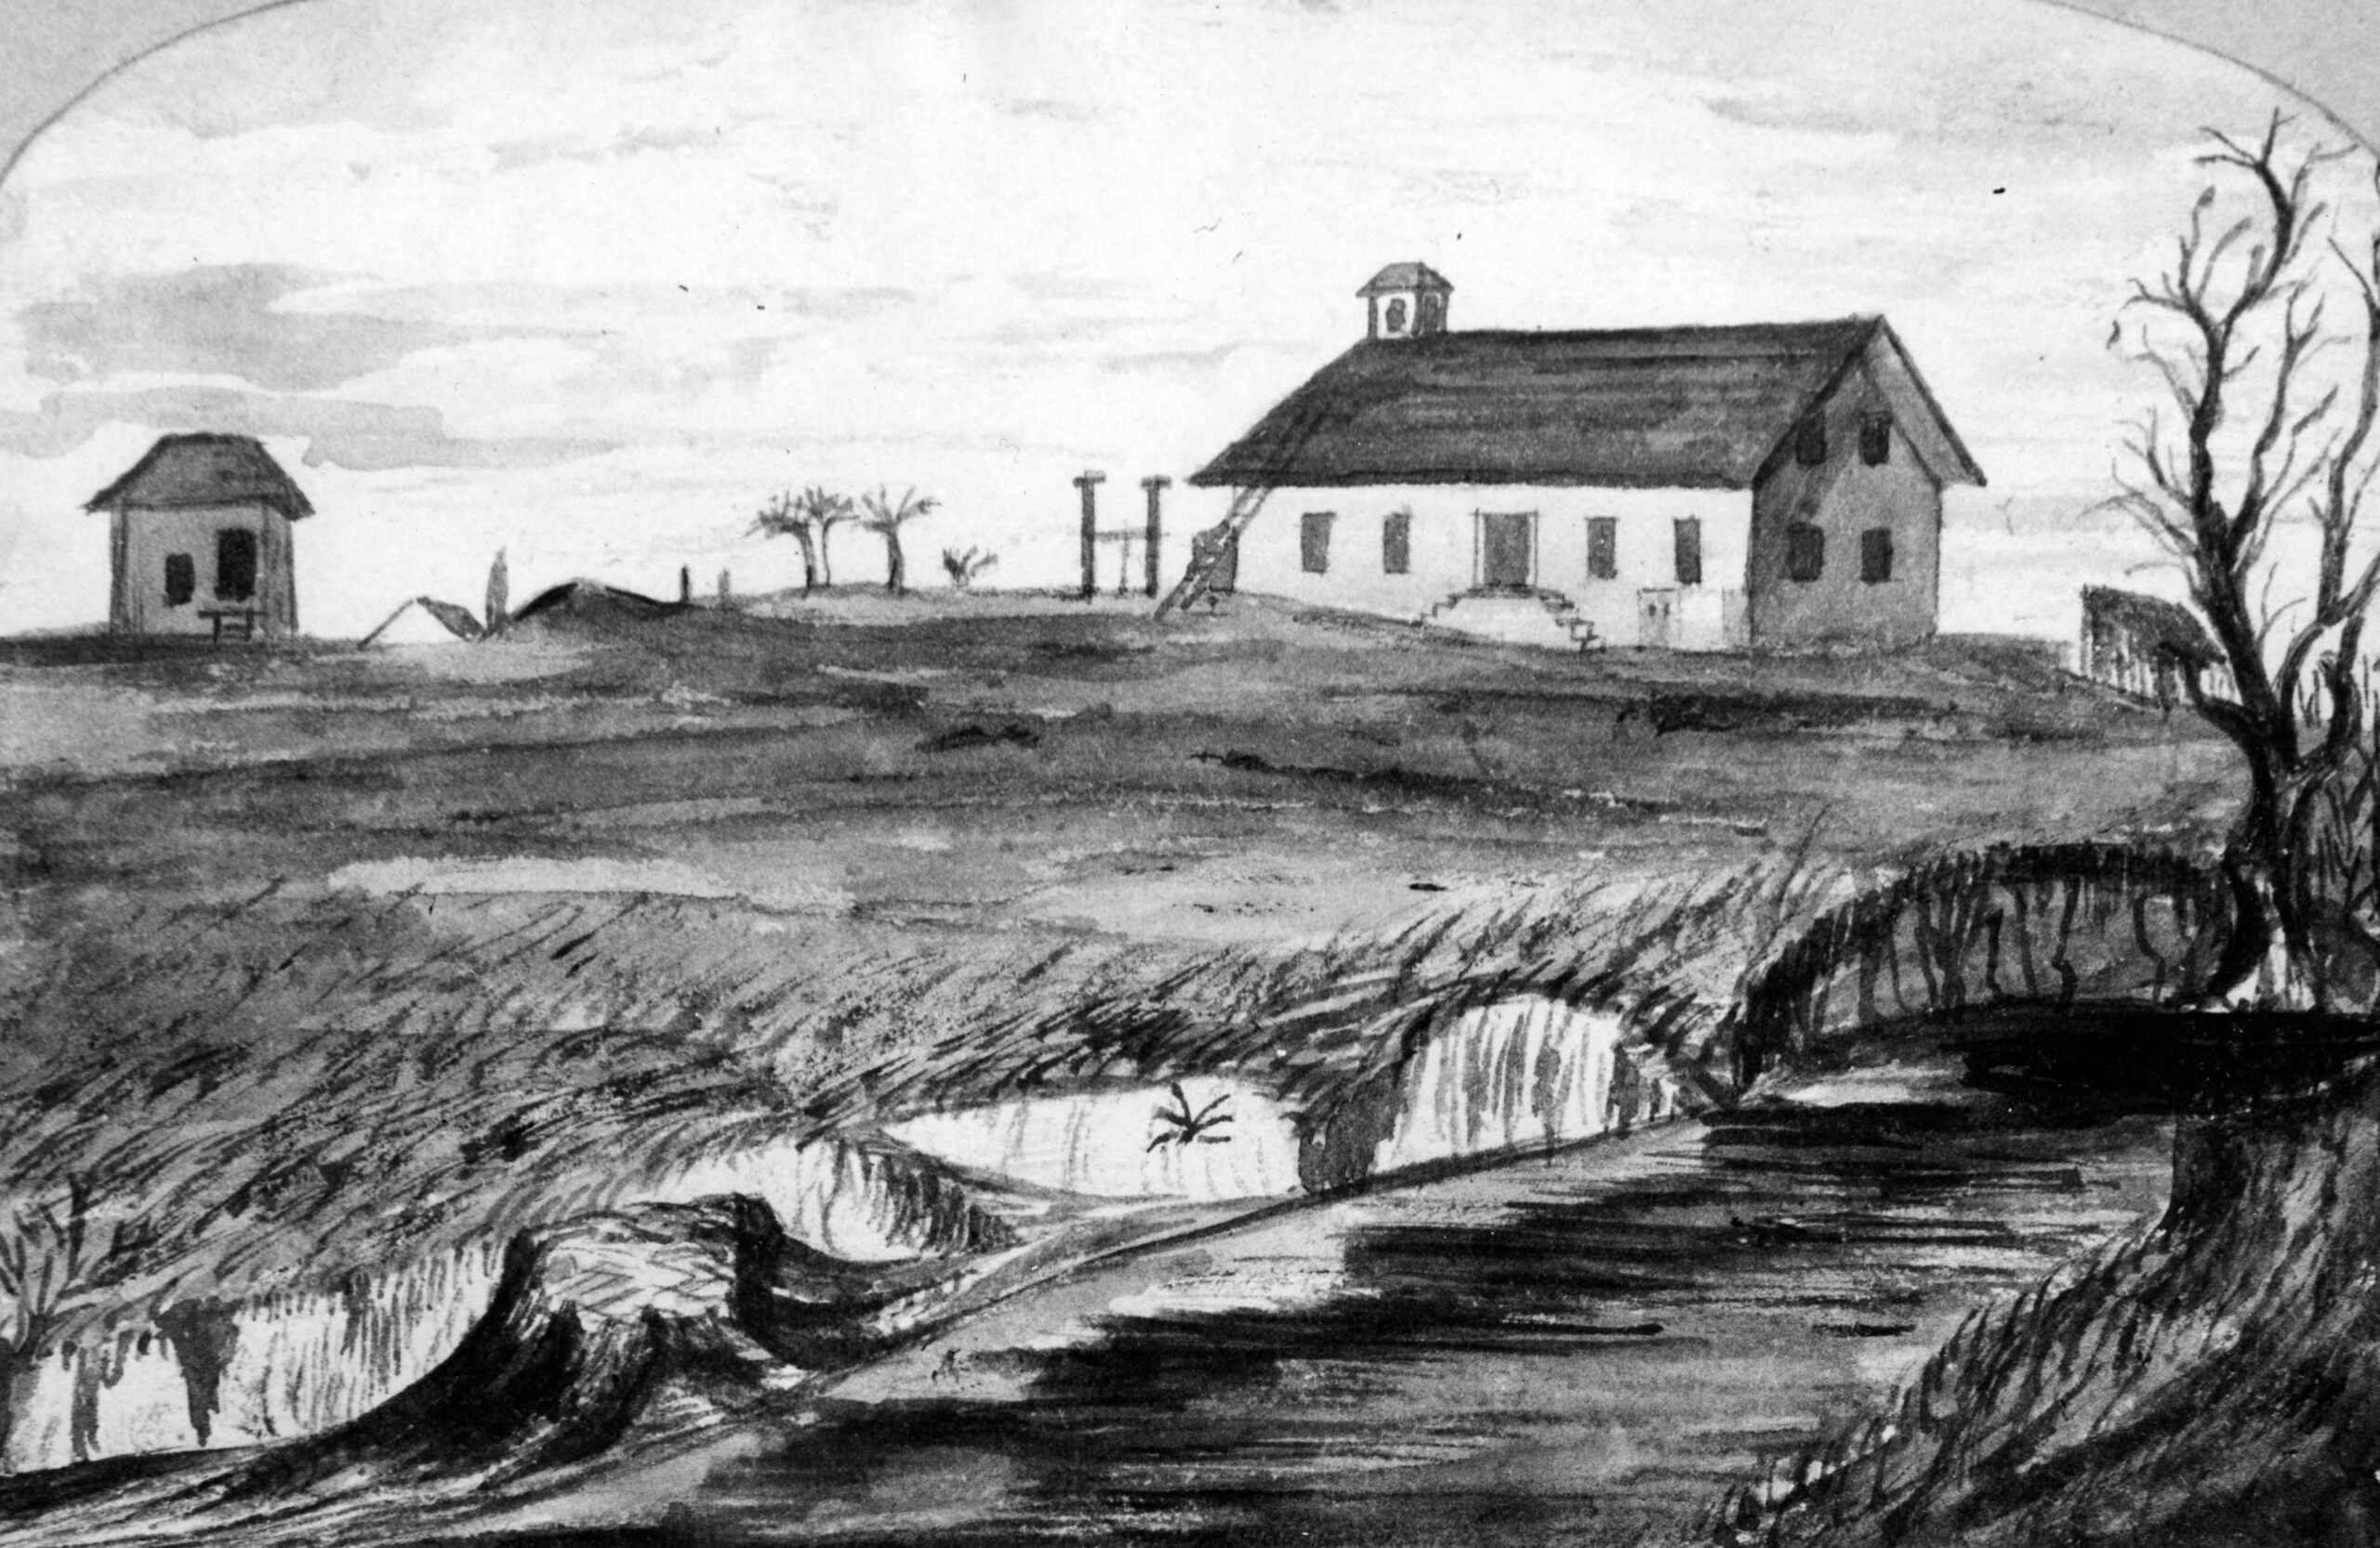 A sketch of Sutter’s Fort as it appeared in 1862, fourteen years after its abandonment by John Sutter.